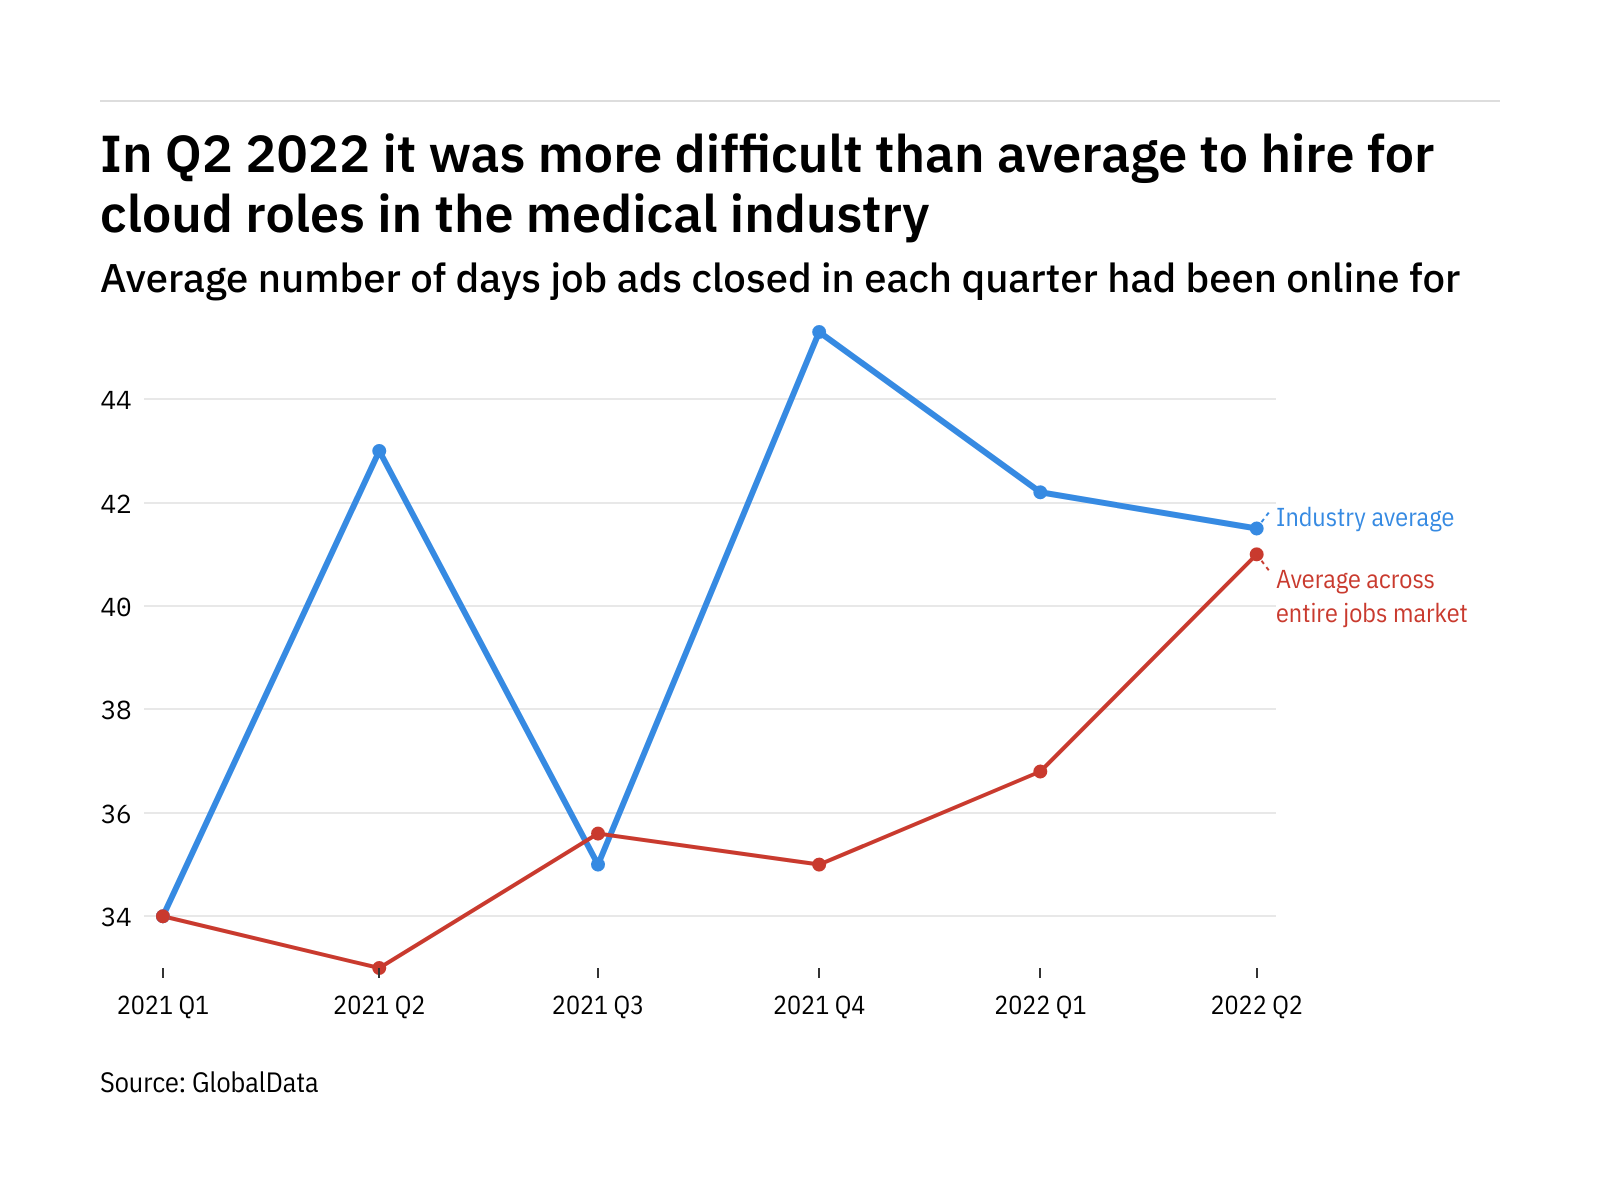 The medical industry found it harder to fill cloud vacancies in Q2 2022